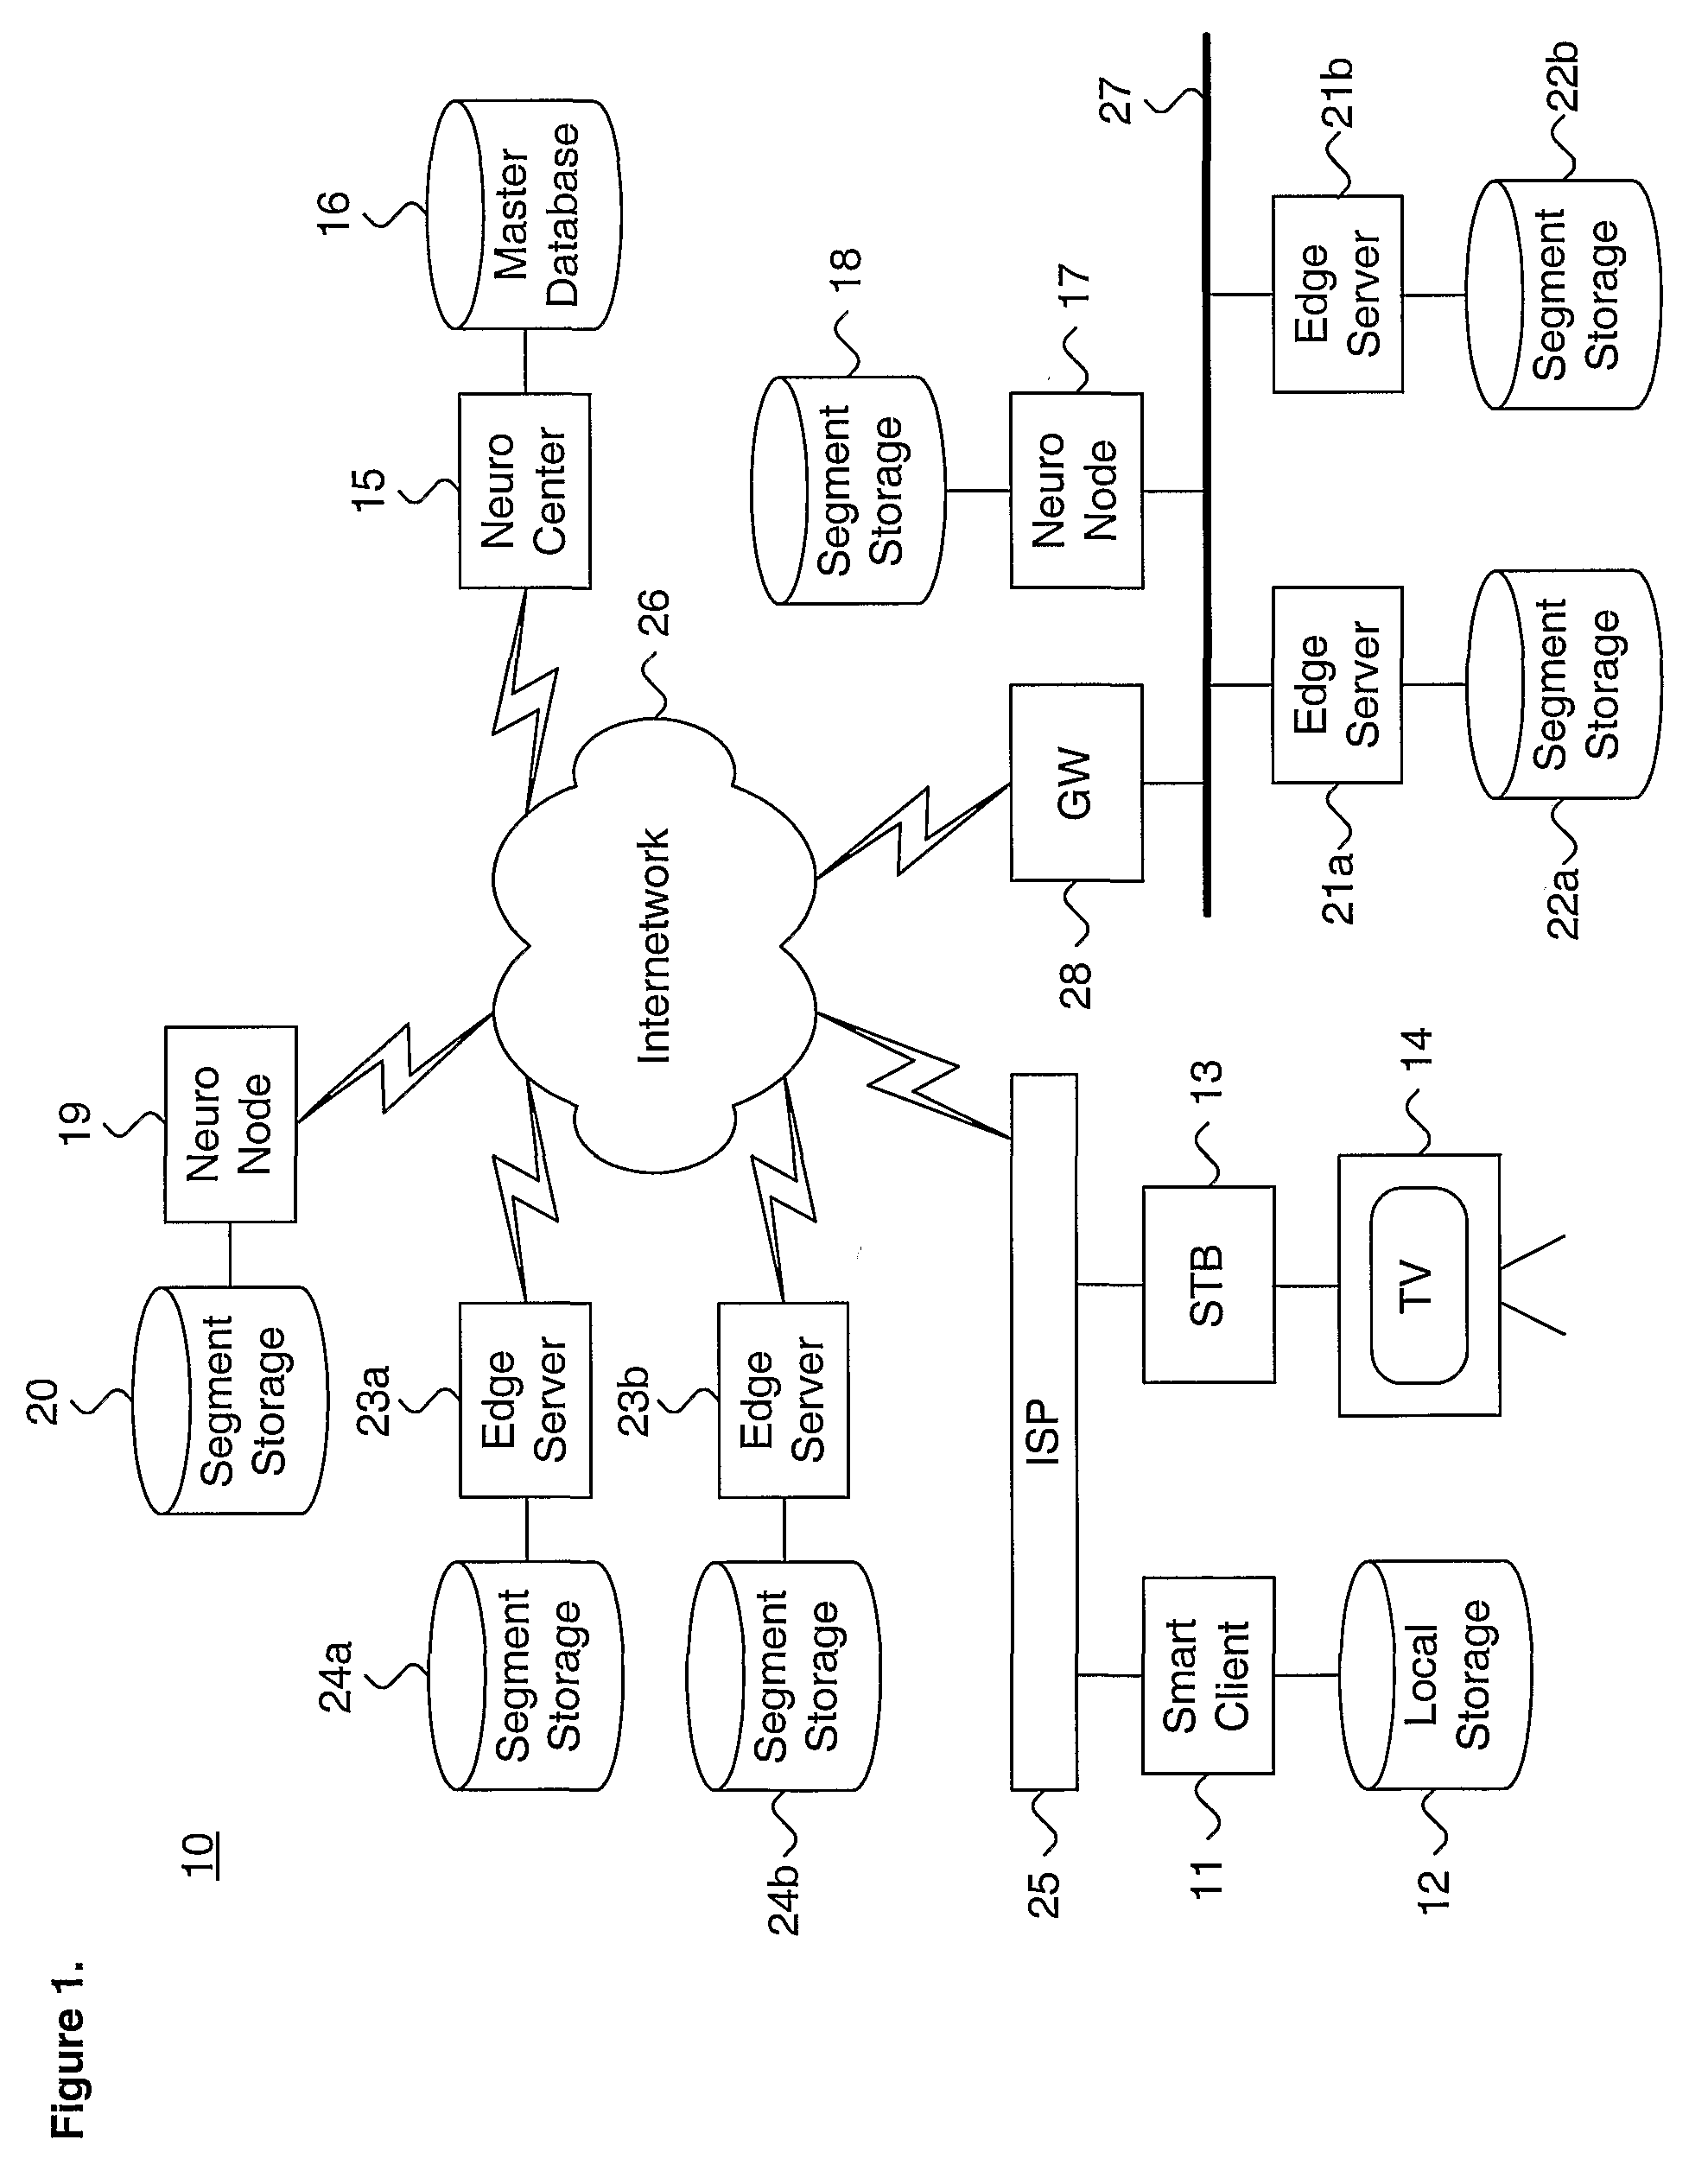 System and method for providing load balanced secure media content and data delivery in a distributed computing environment